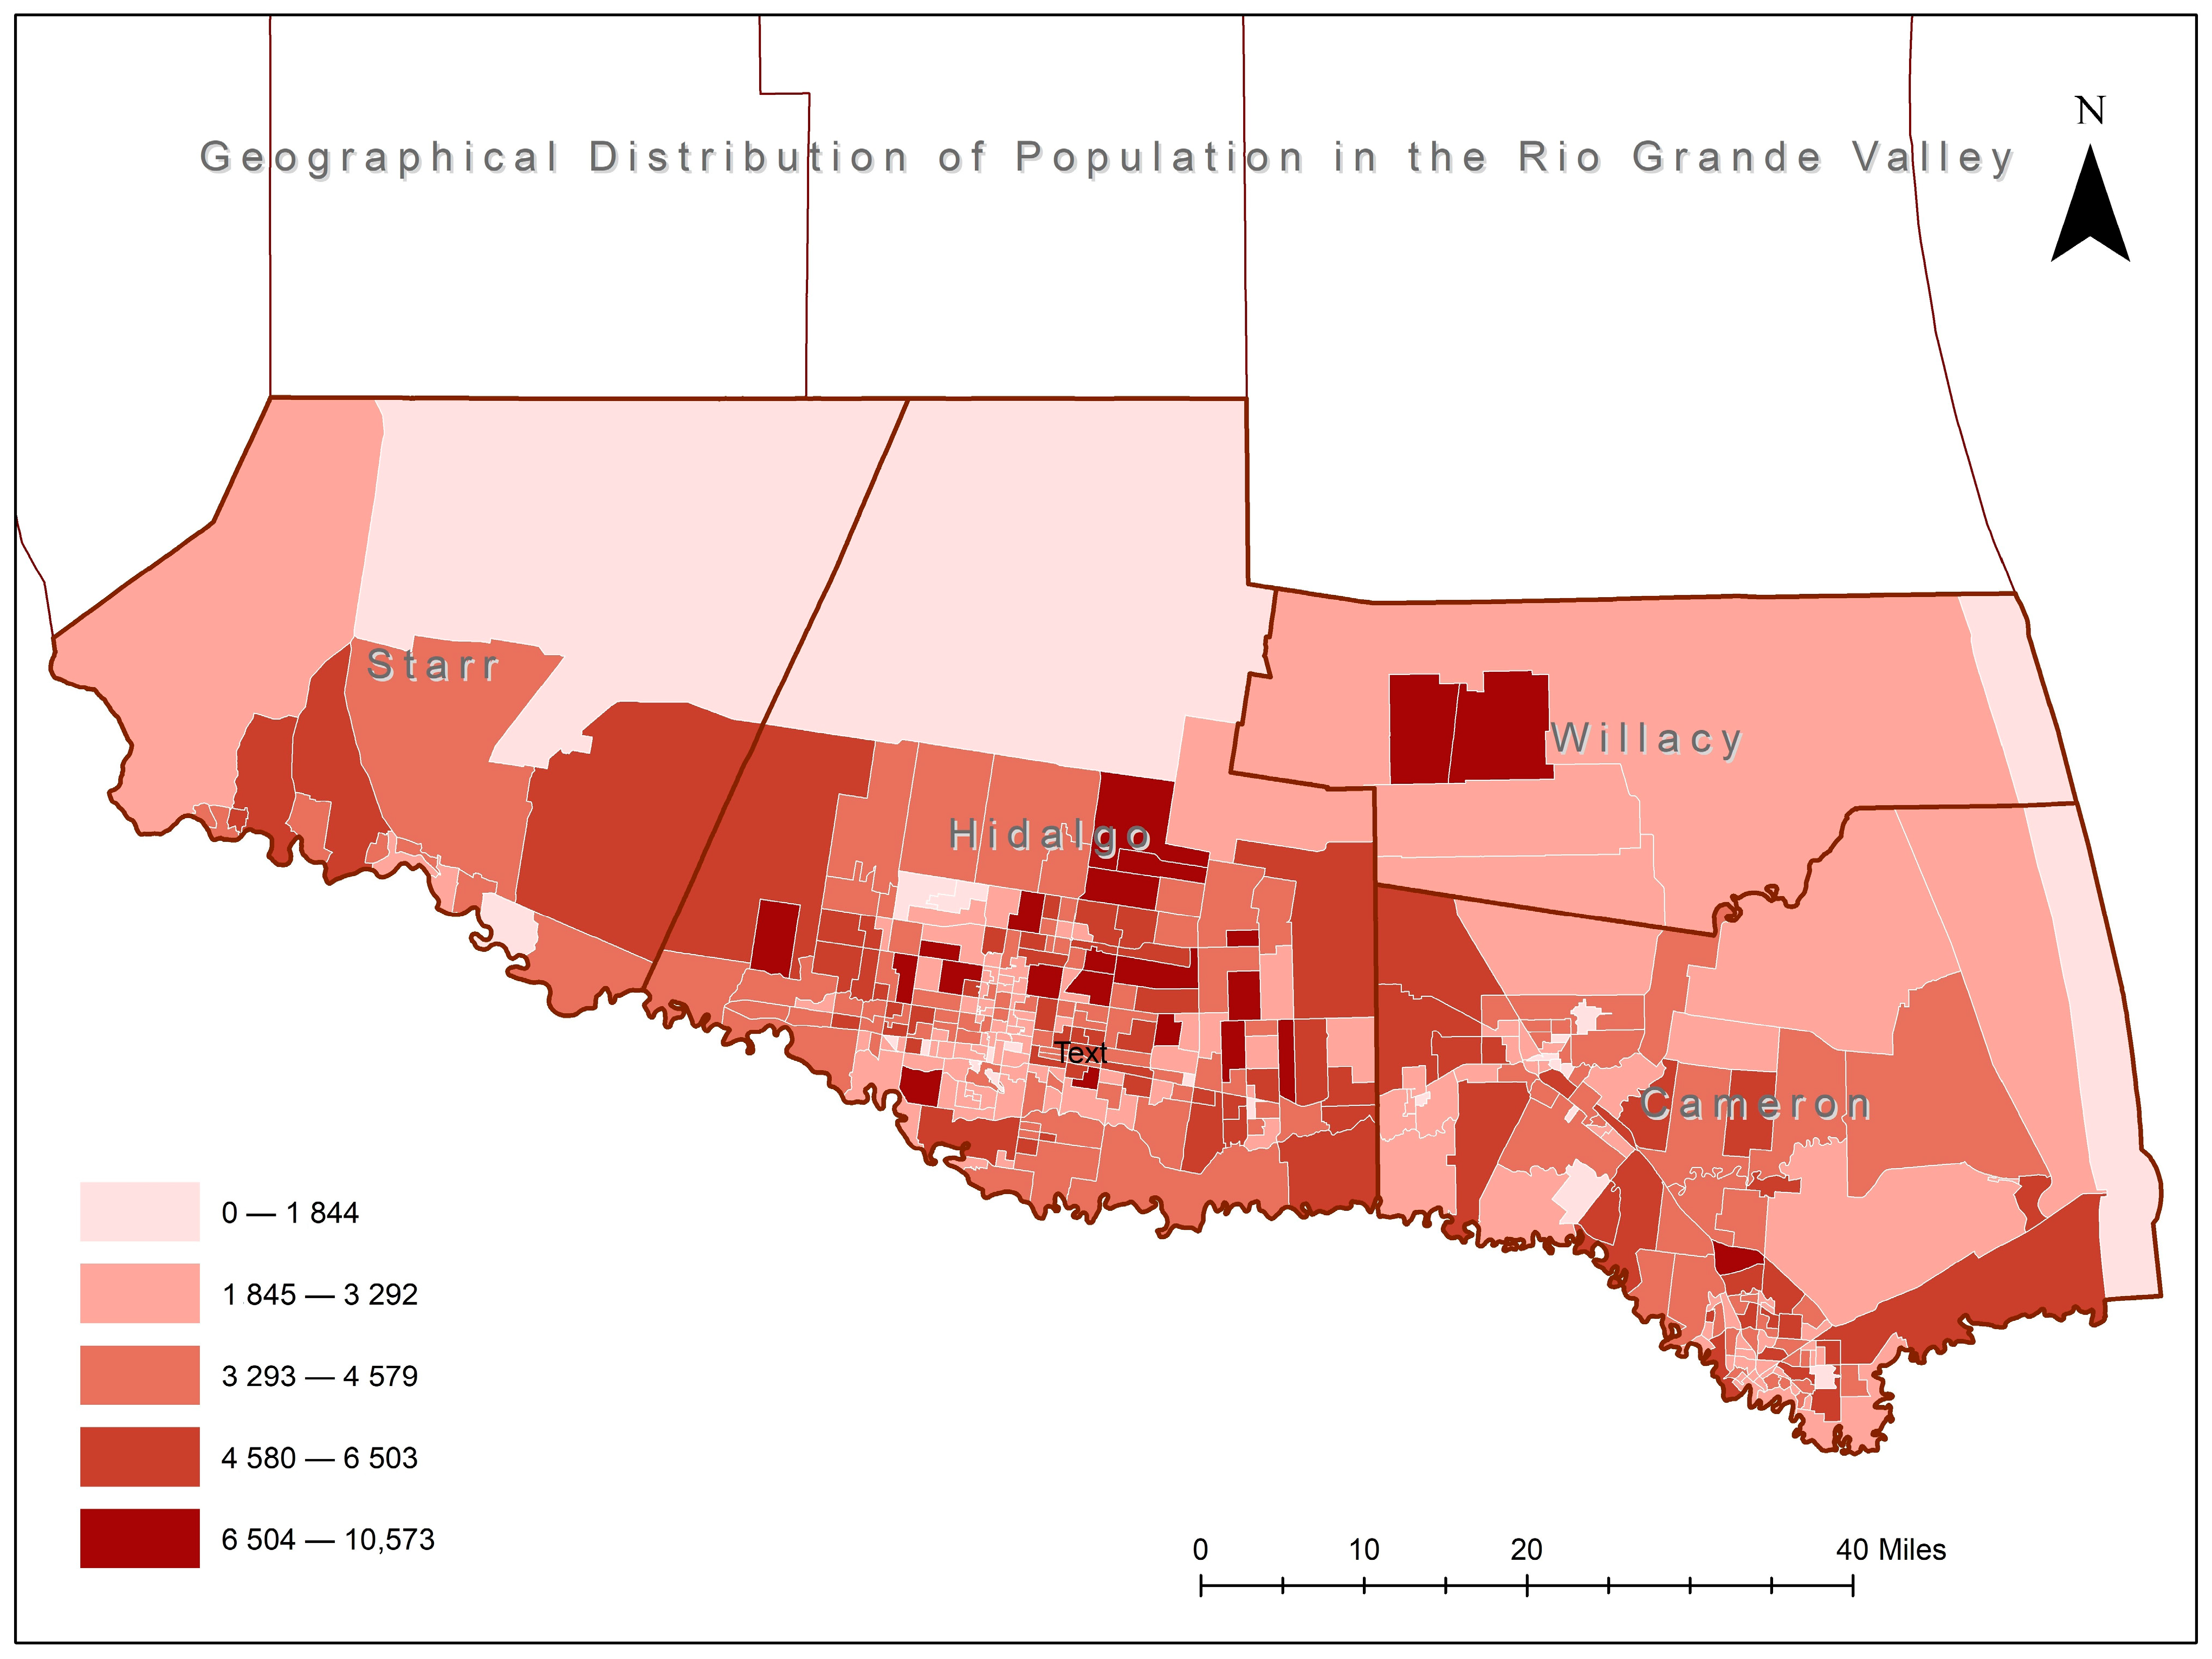 Social Sciences Free Full-Text An Exploratory Study on the Association between Community Resilience and Disaster Preparedness in the Rio Grande Valley image